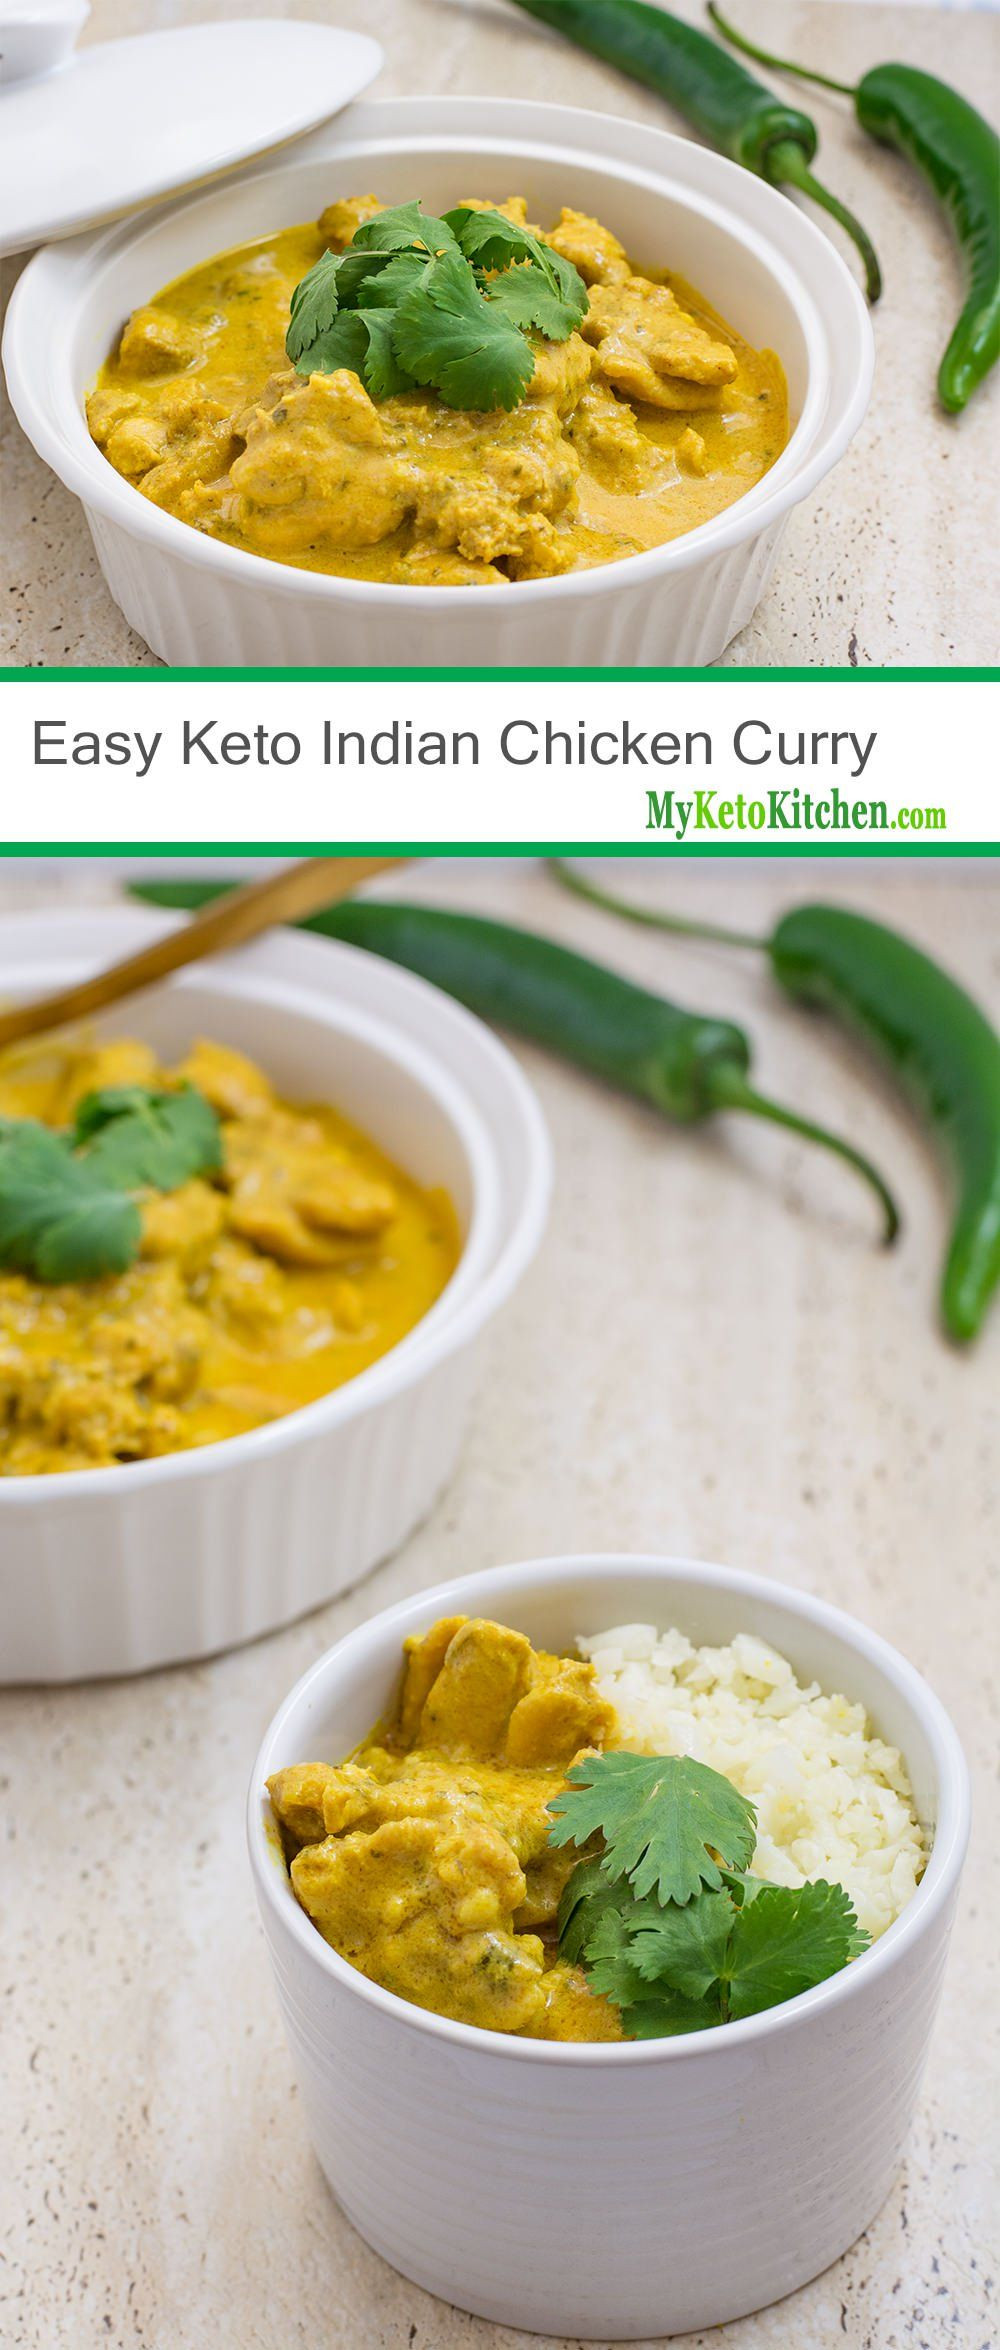 Vegetarian Keto Curry
 Keto Indian Chicken Curry Recipe